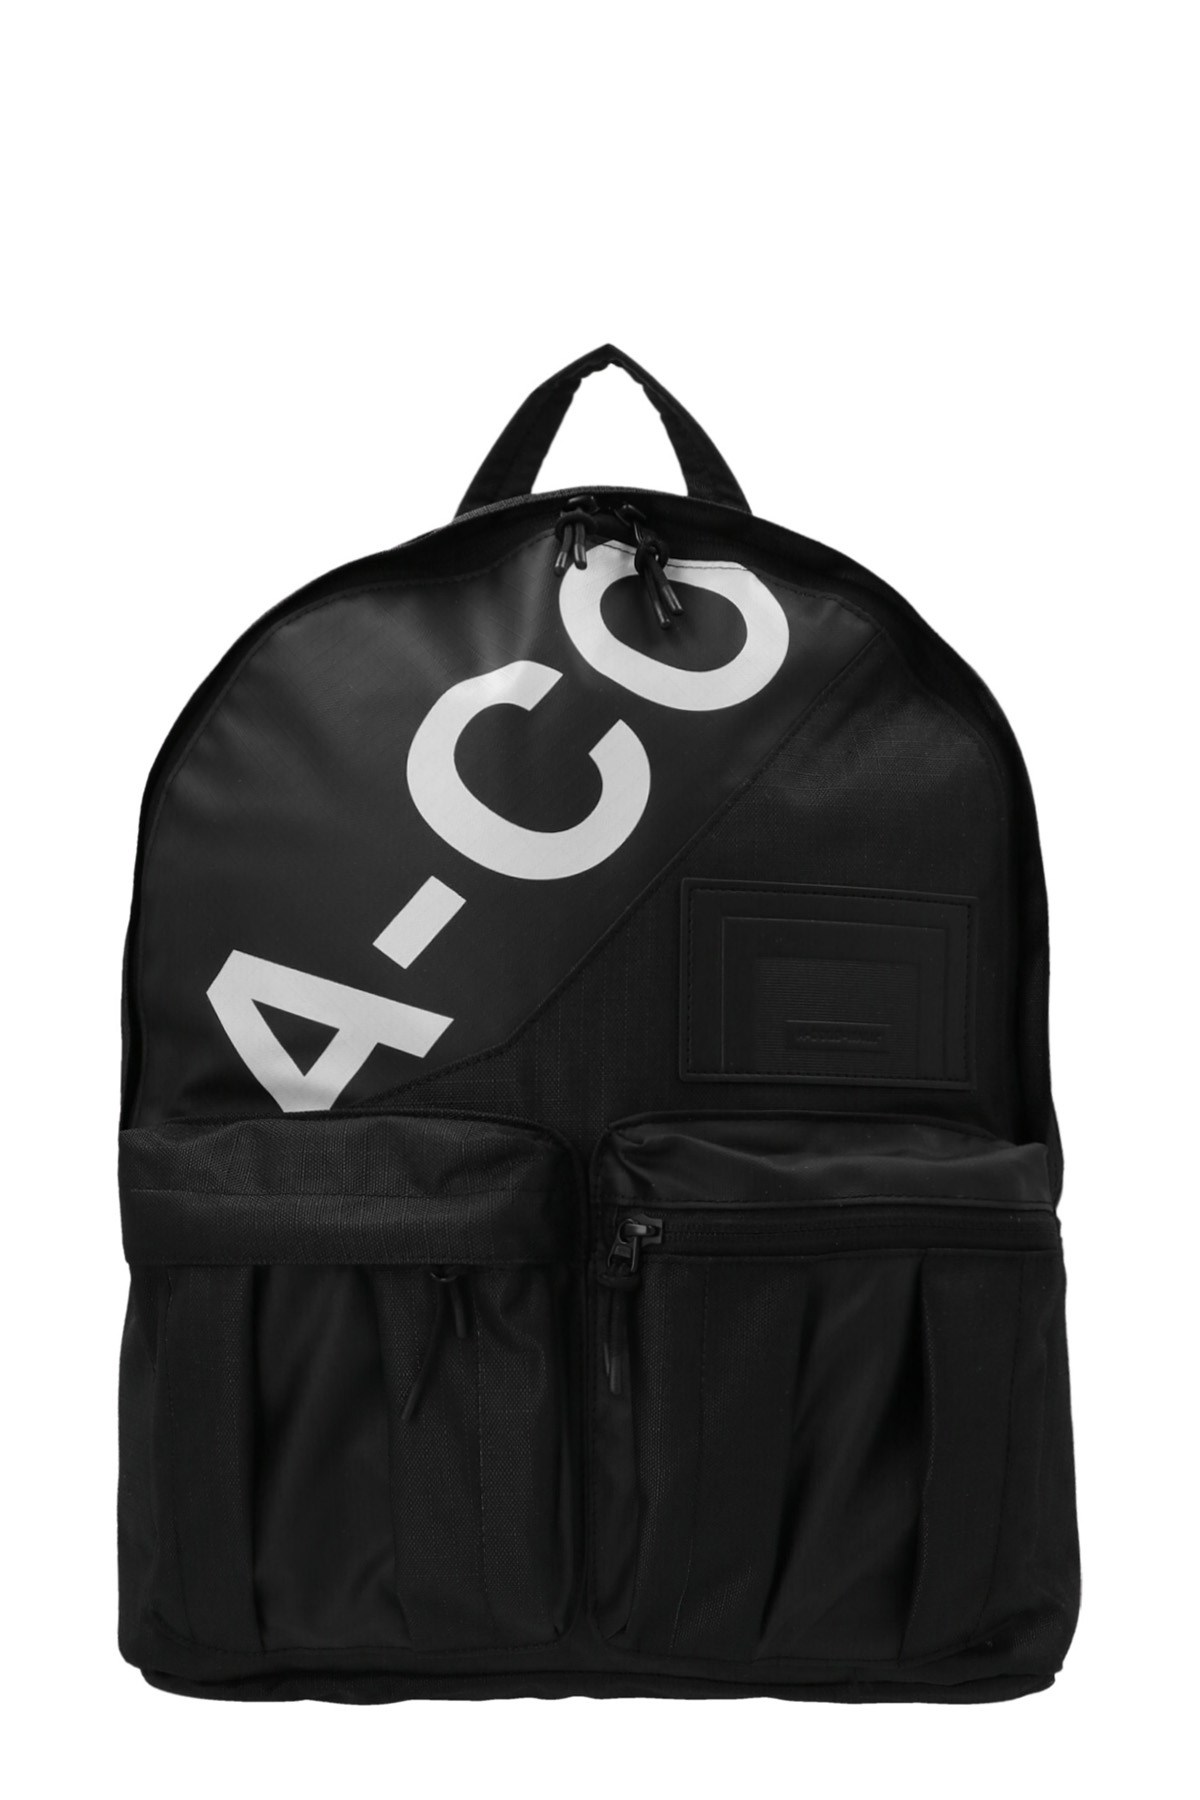 A-COLD-WALL* Rucksack 'Type Graphic'